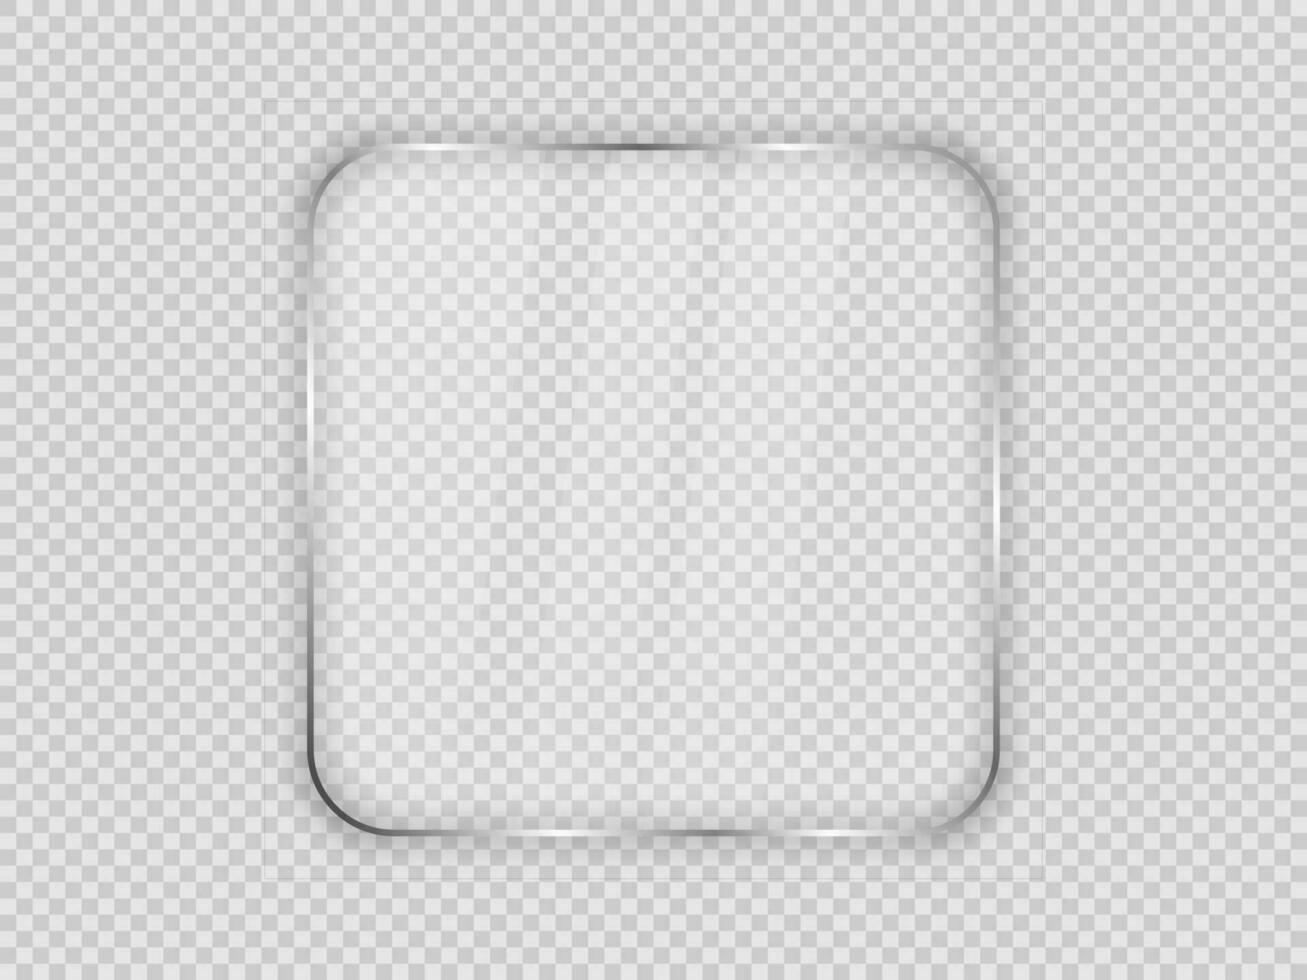 Glass plate in rounded square frame isolated on background. Vector illustration.